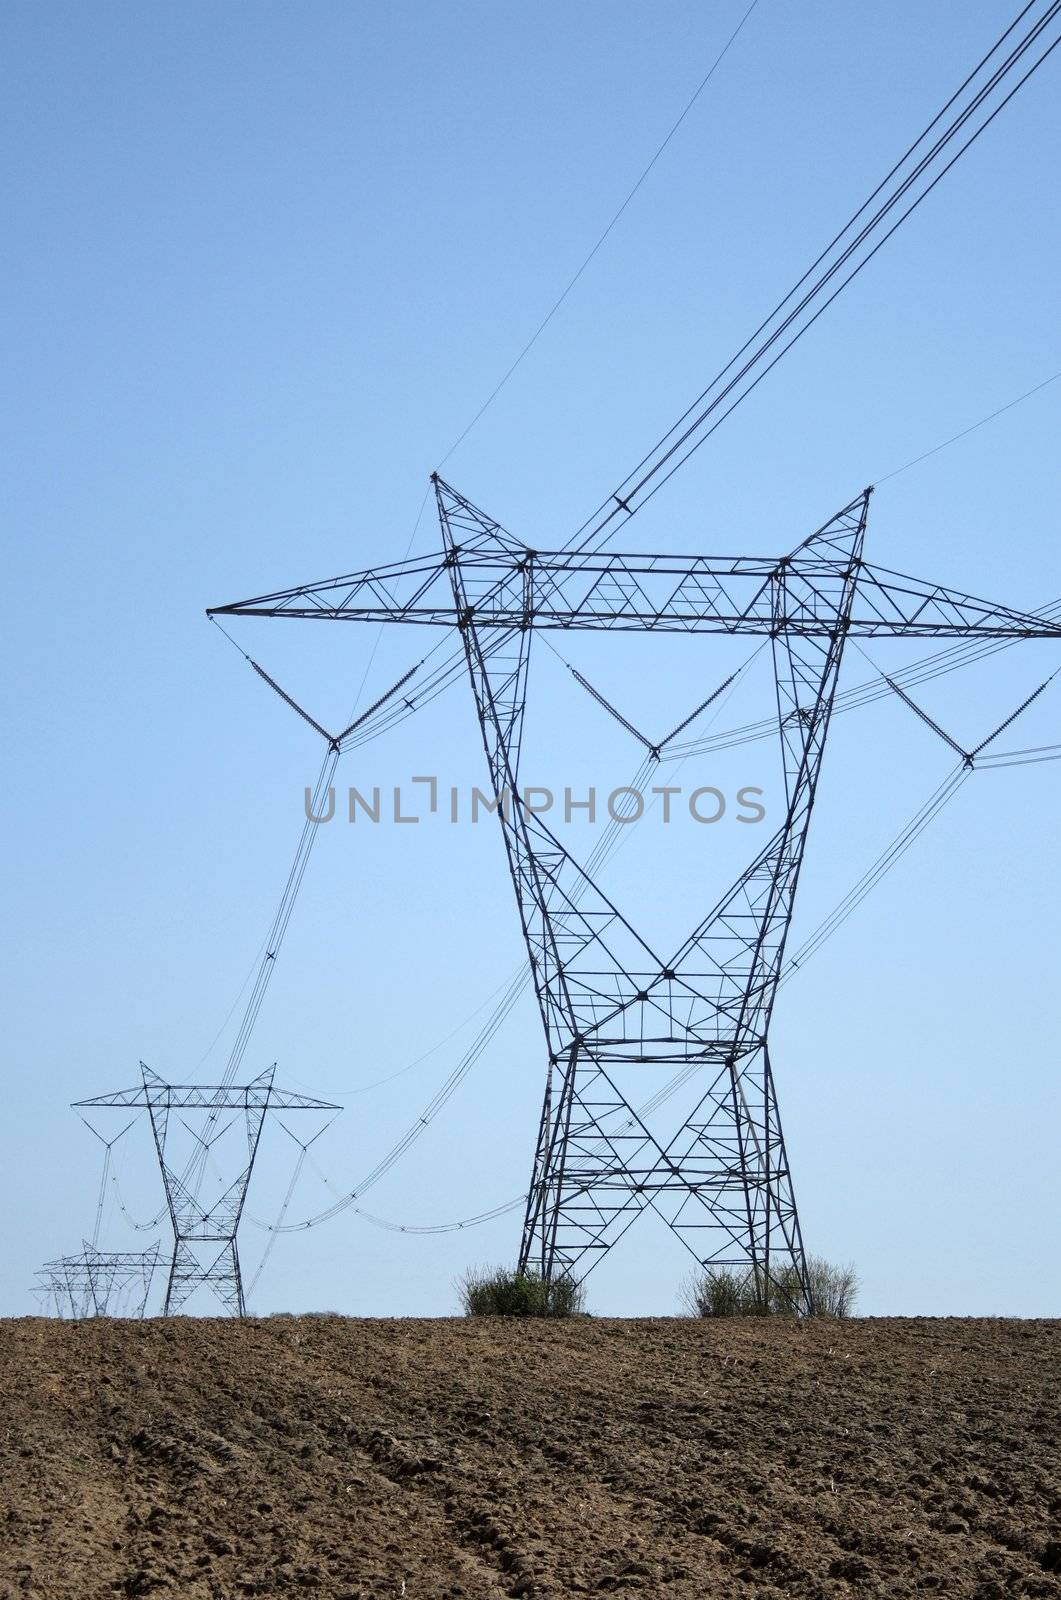 Electricity pylons in ploughed farmland in spring.